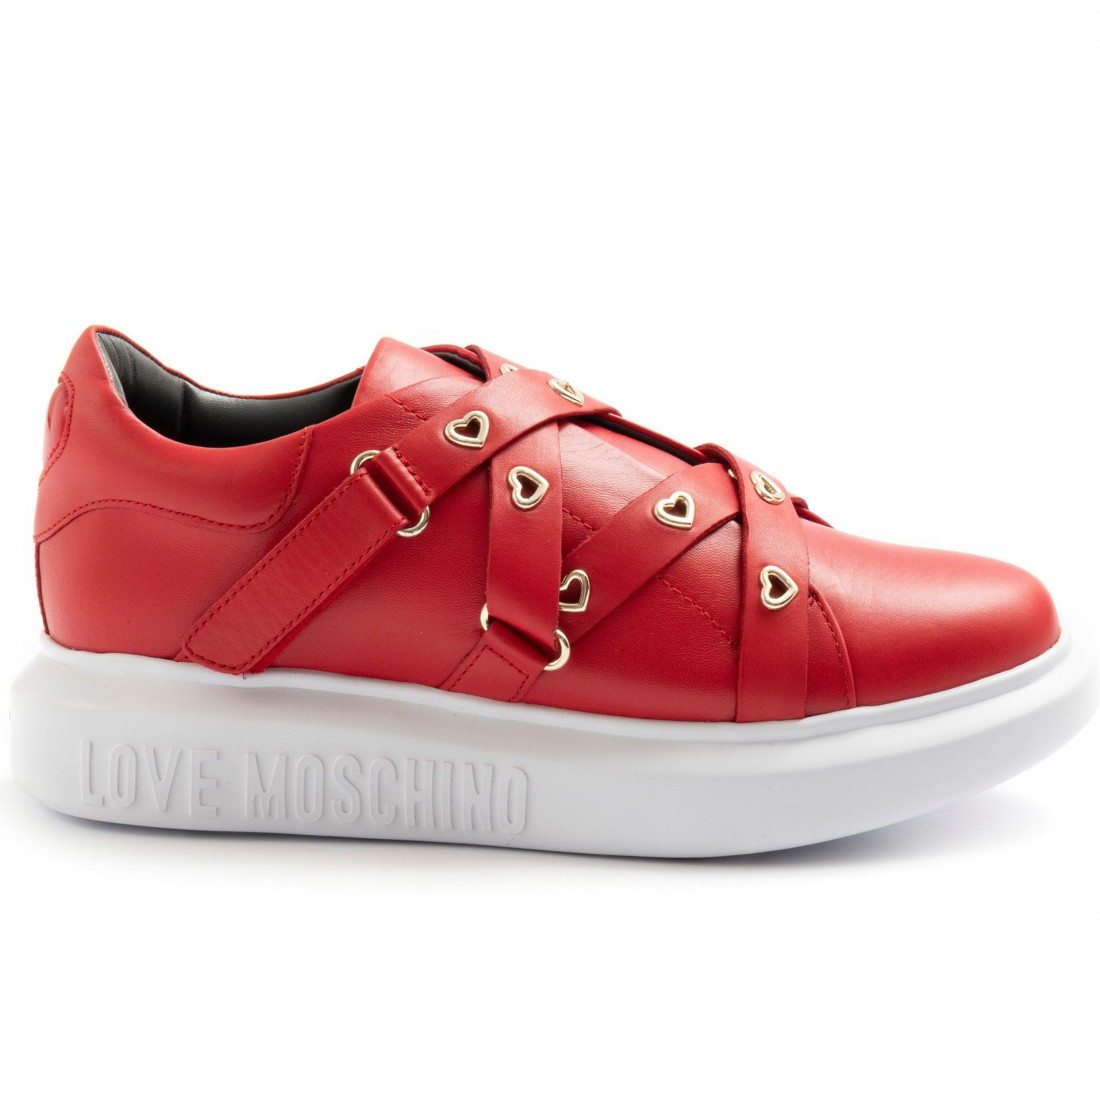 Love Moschino women's red sneaker with 